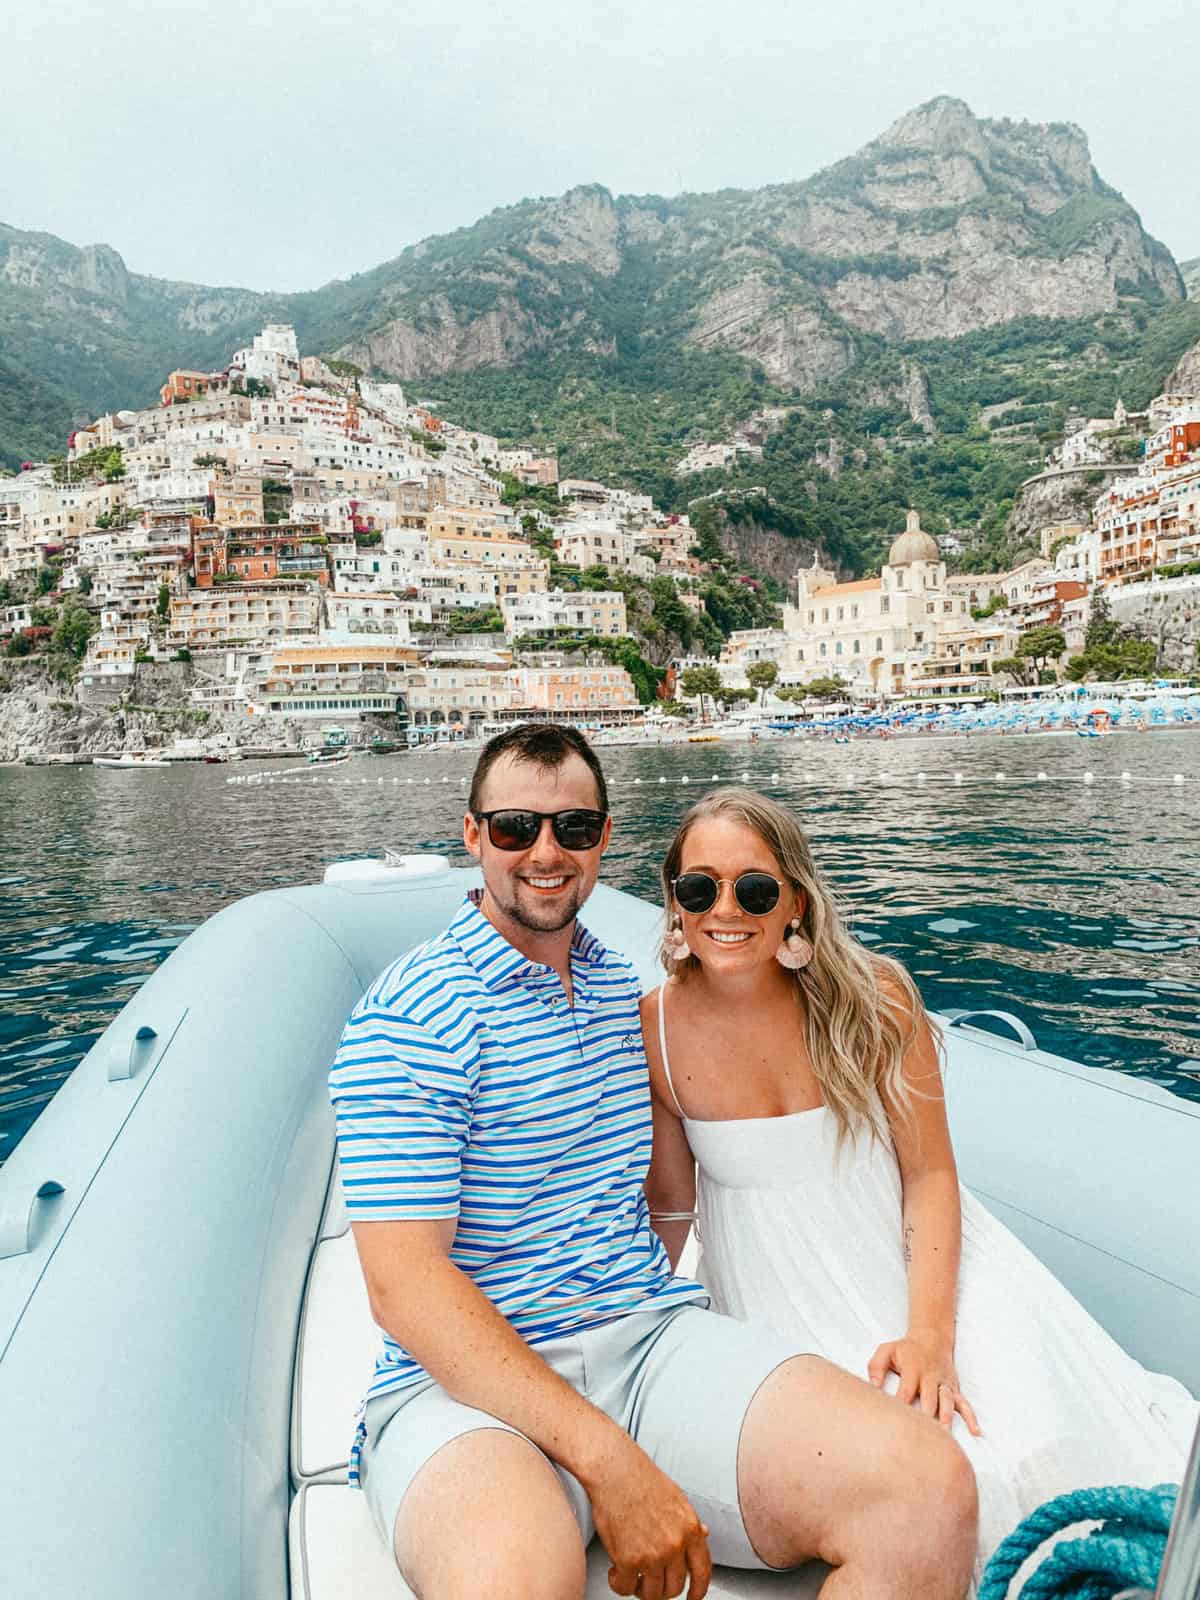 Abby and Sam on a boat in the Amalfi Coast with colorful building behind them. This trip is one of the reasons they created their couples travel blog Trekking Price's.